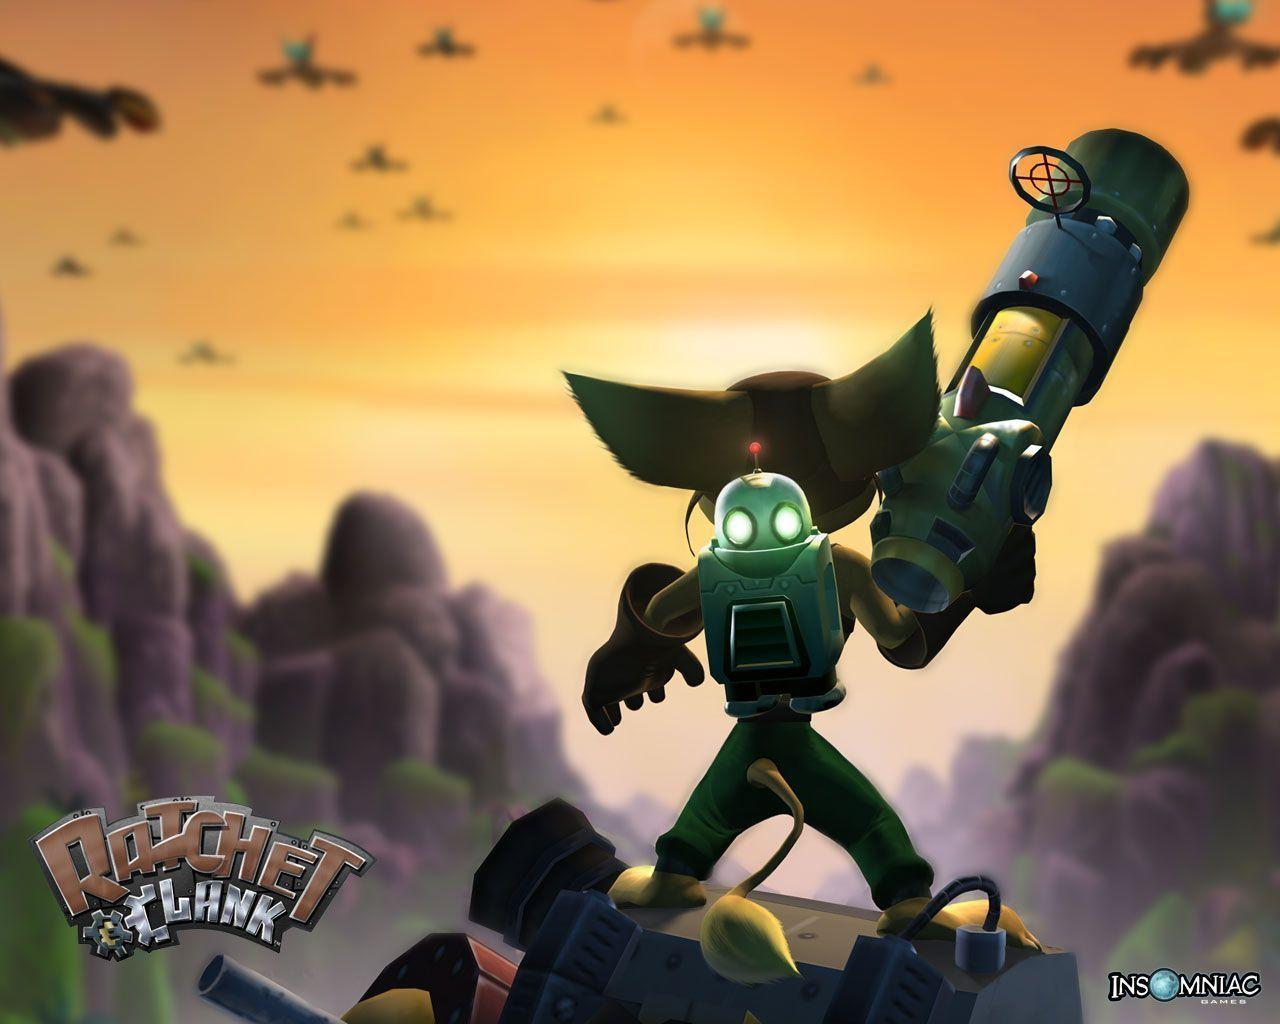 Wallpaper from Ratchet & Clank Galaxy Ultimate